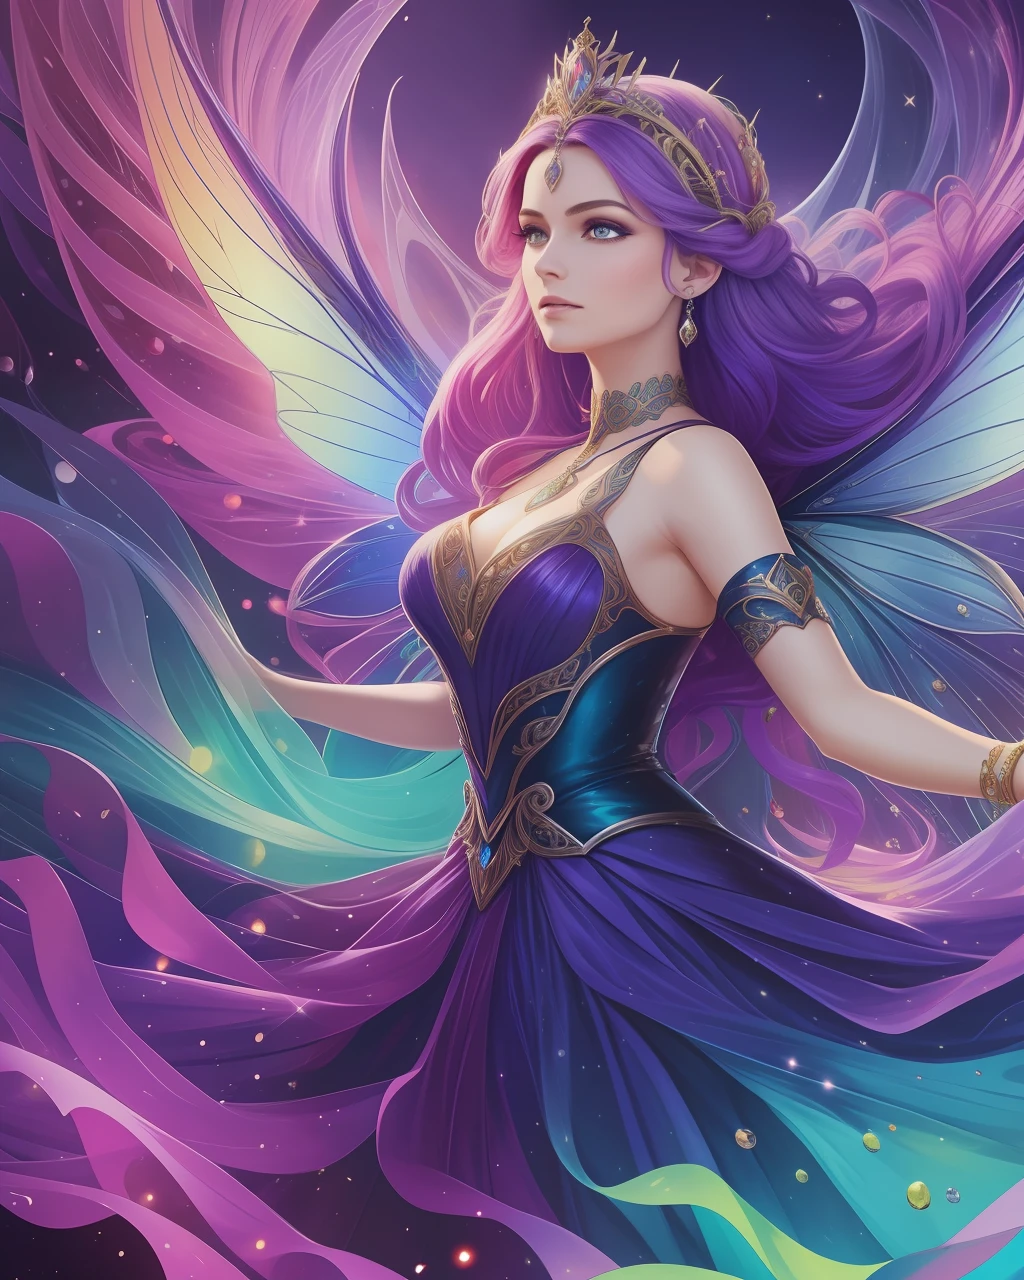 (masterpiece), best quality, an otherworldly, fantastical depiction of "Queen Mab", the queen of the fairies, floating in mid-air, surrounded by a vibrant, ethereal background. Her hair in a disarray of multitude colors, her dress shimmering with a metallic iridescence, her face with a mischievous, knowing expression. The landscape around her is awash in splashes of vivid, bright colors contrasted against deep shadows and supernatural glows.